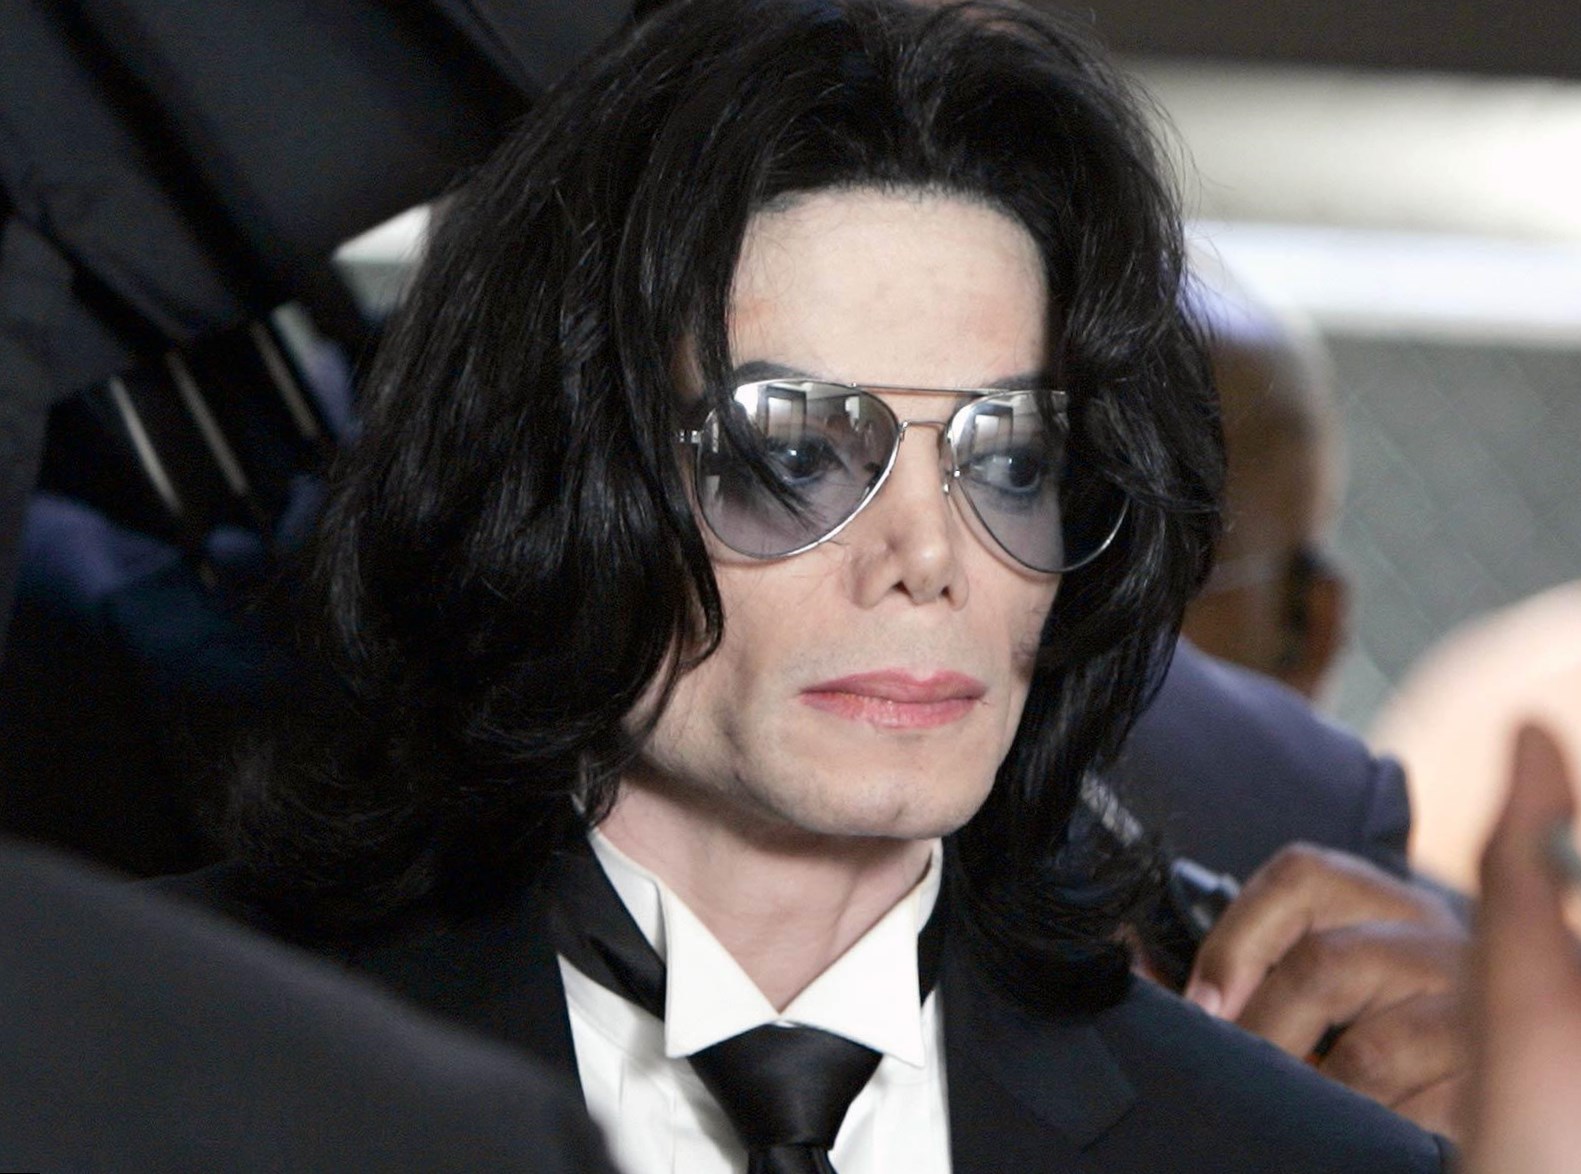 What was Michael Jackson's net worth?